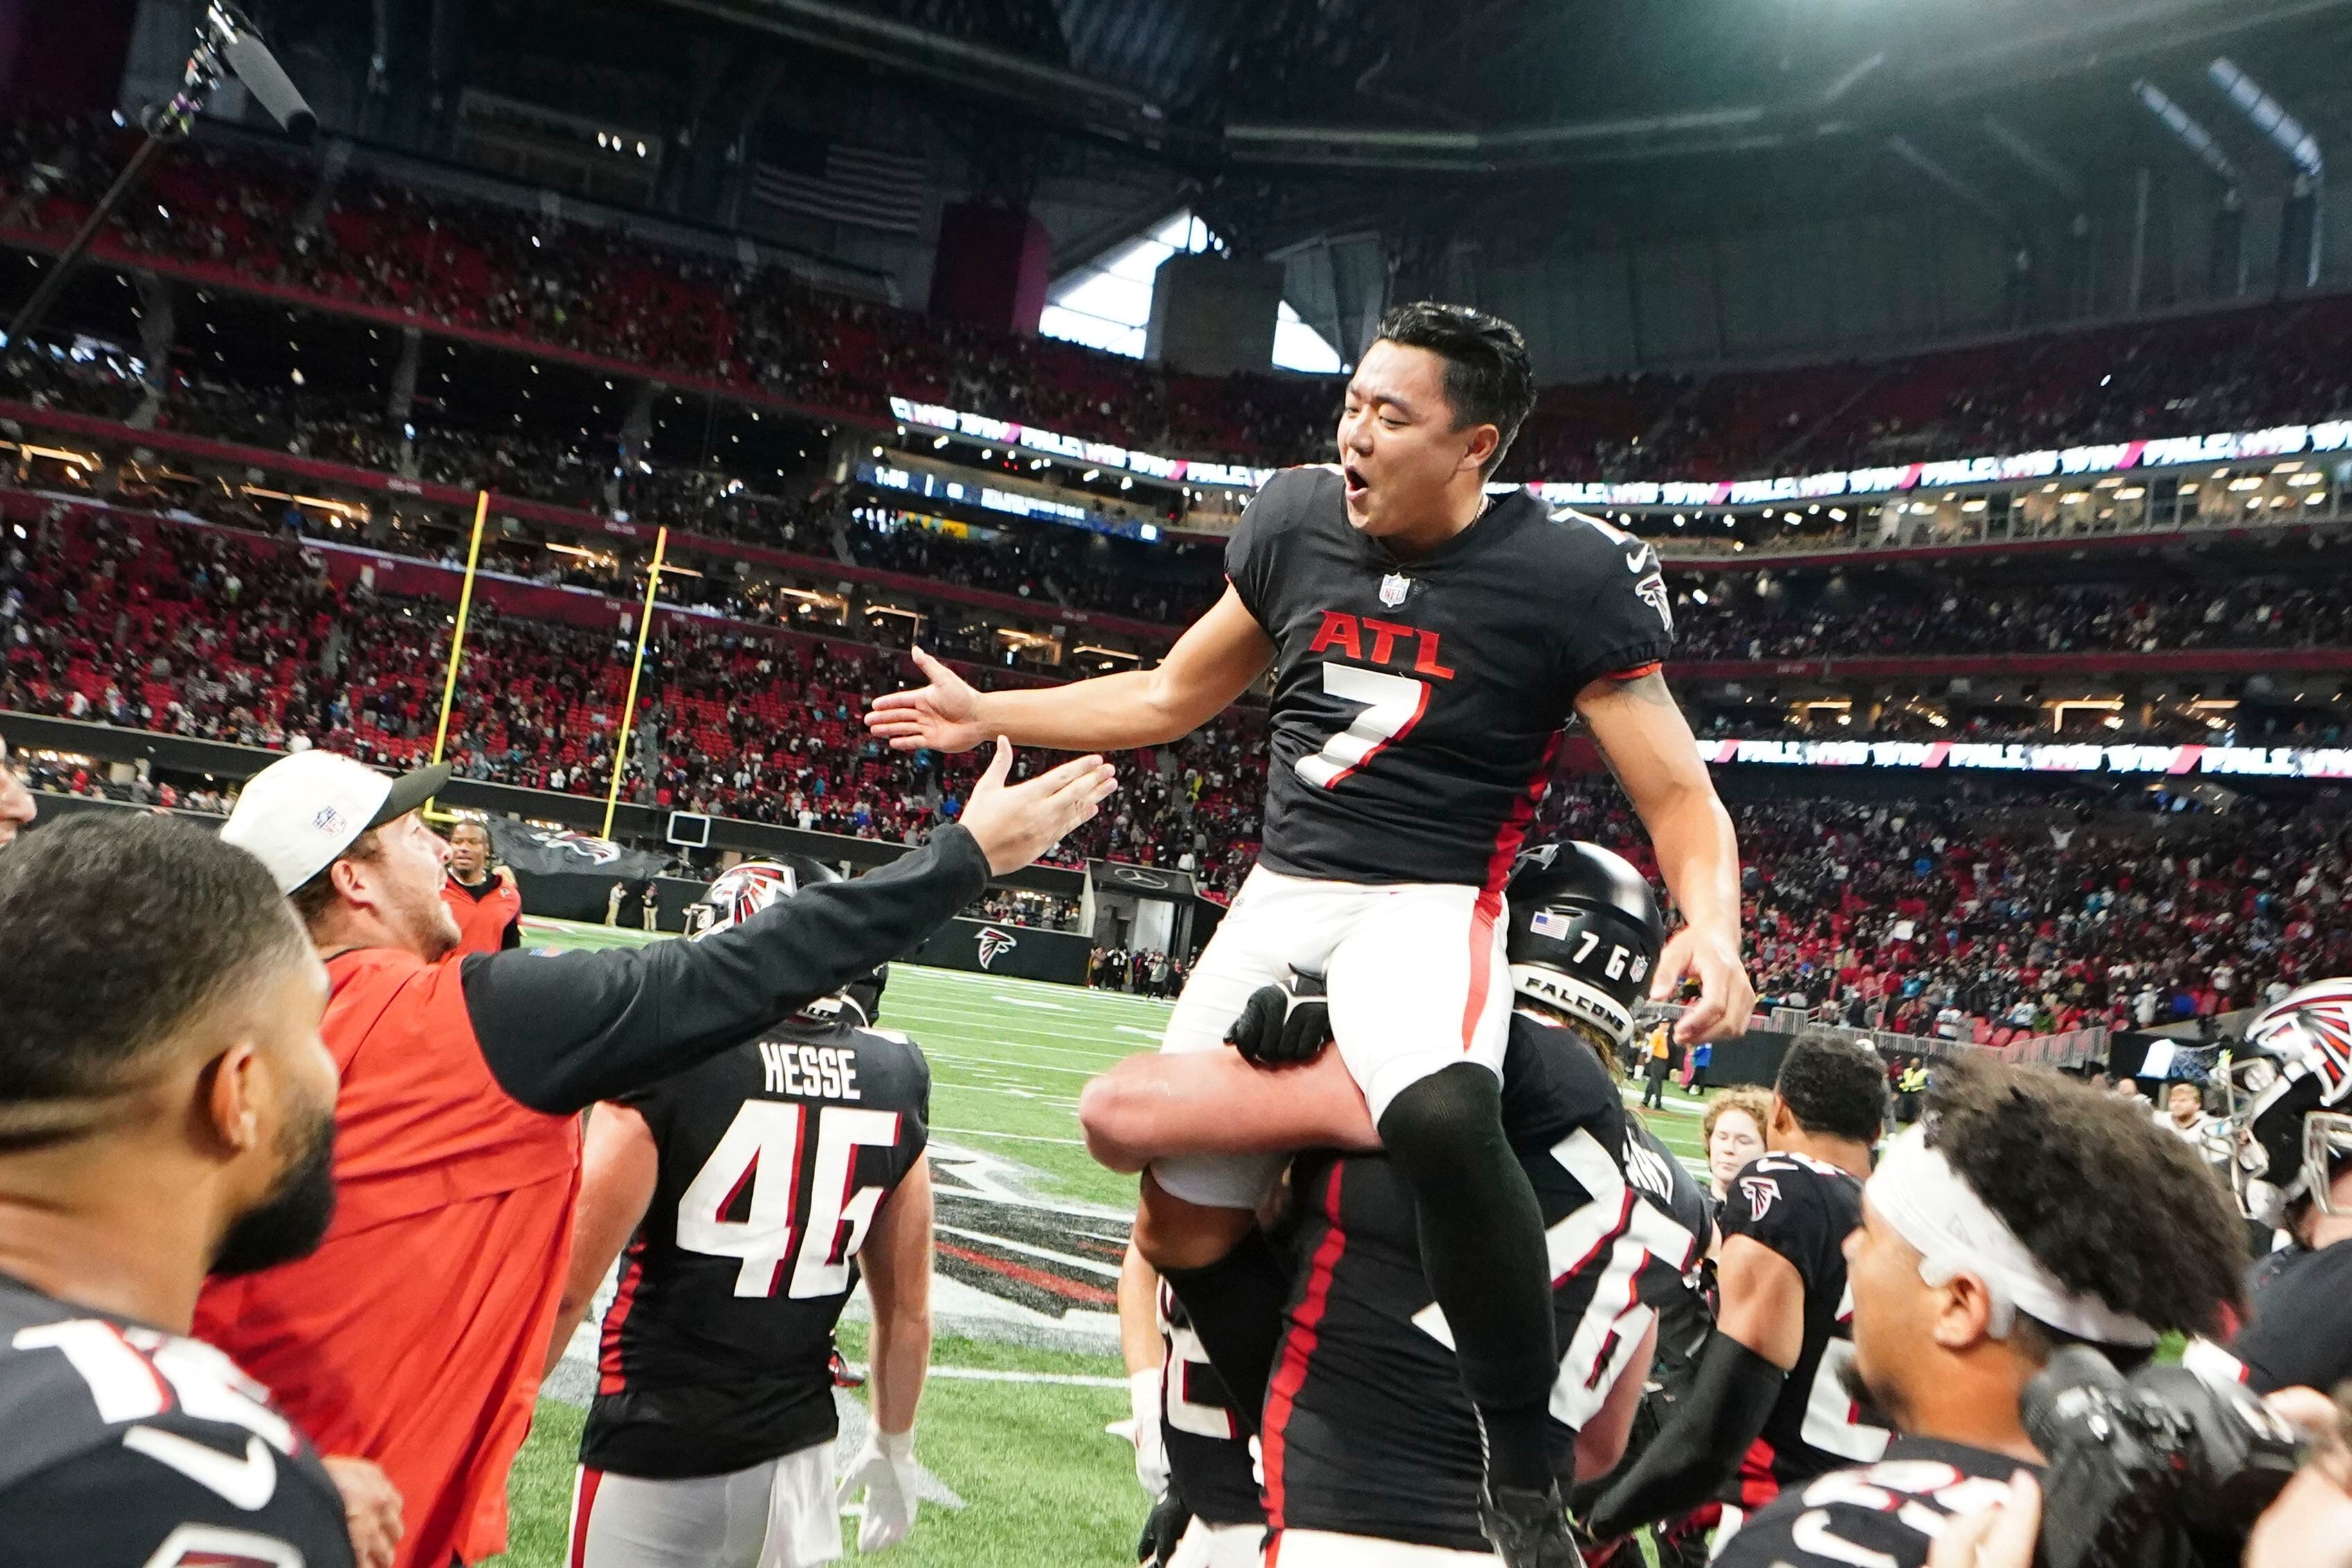 Falcons kicker Younghoe Koo changes jersey number